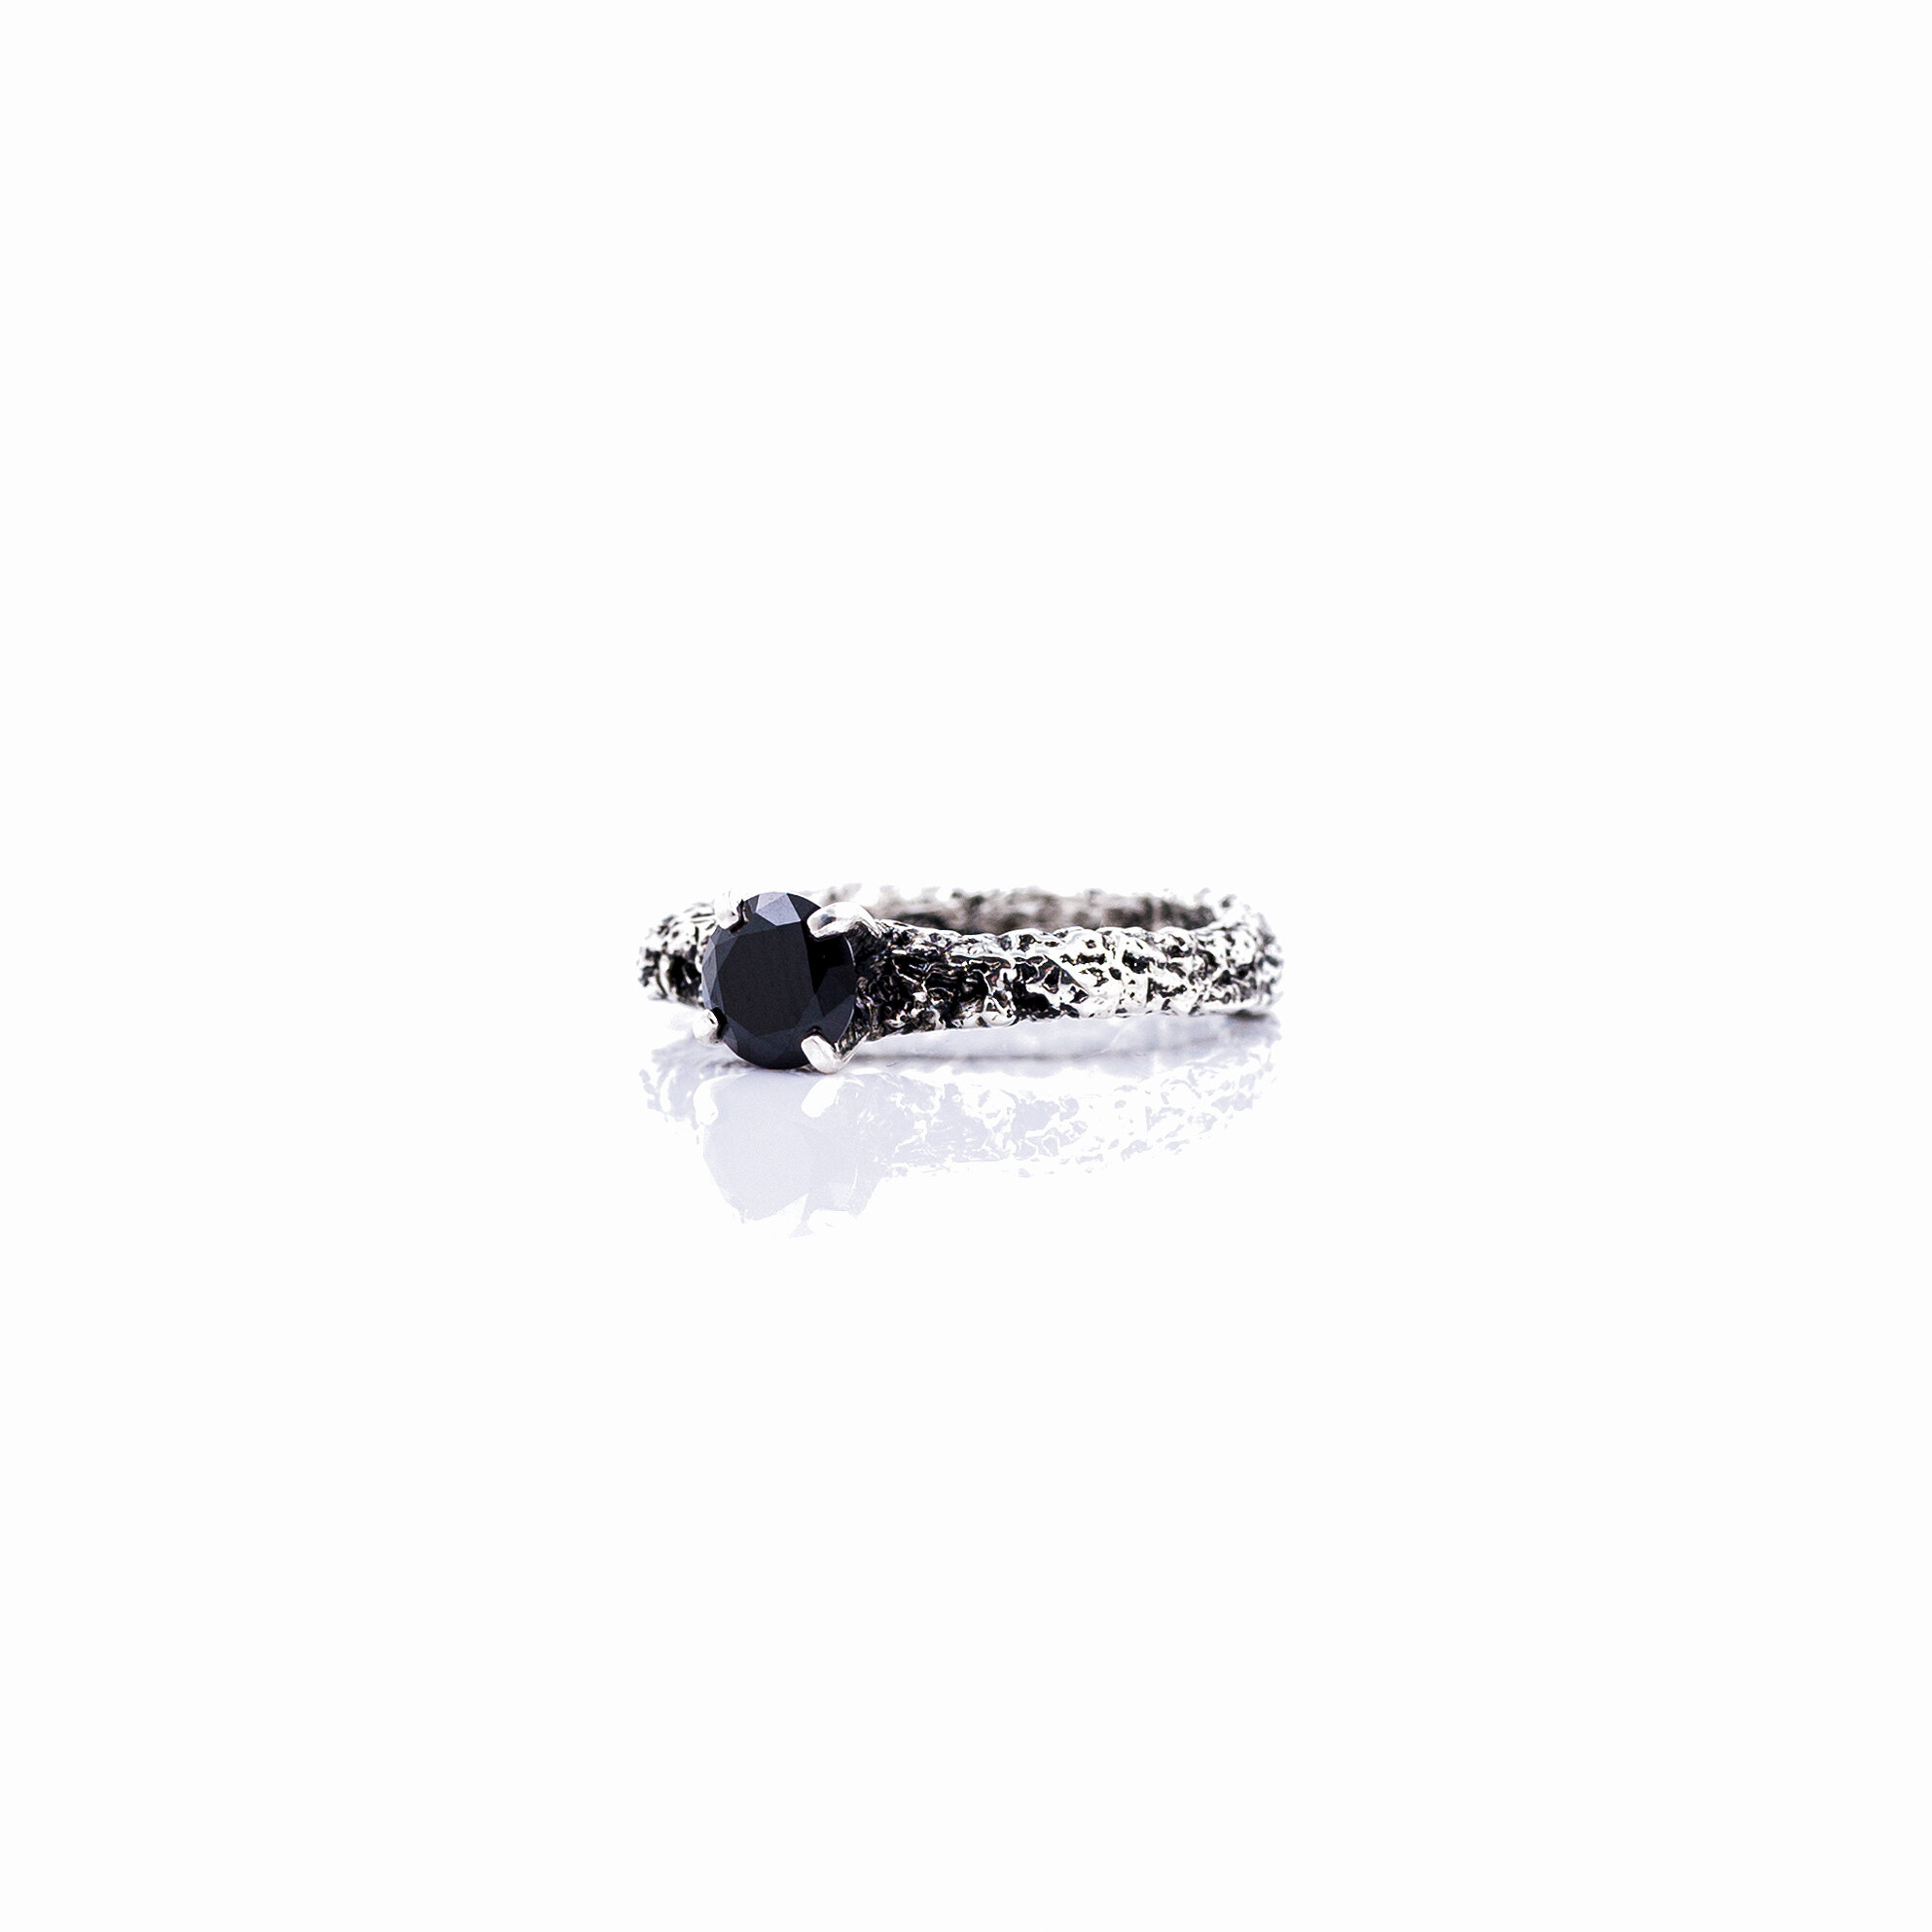 Graceful Inner Islands Solitaire Ring | Sterling silver, black spinel, patina